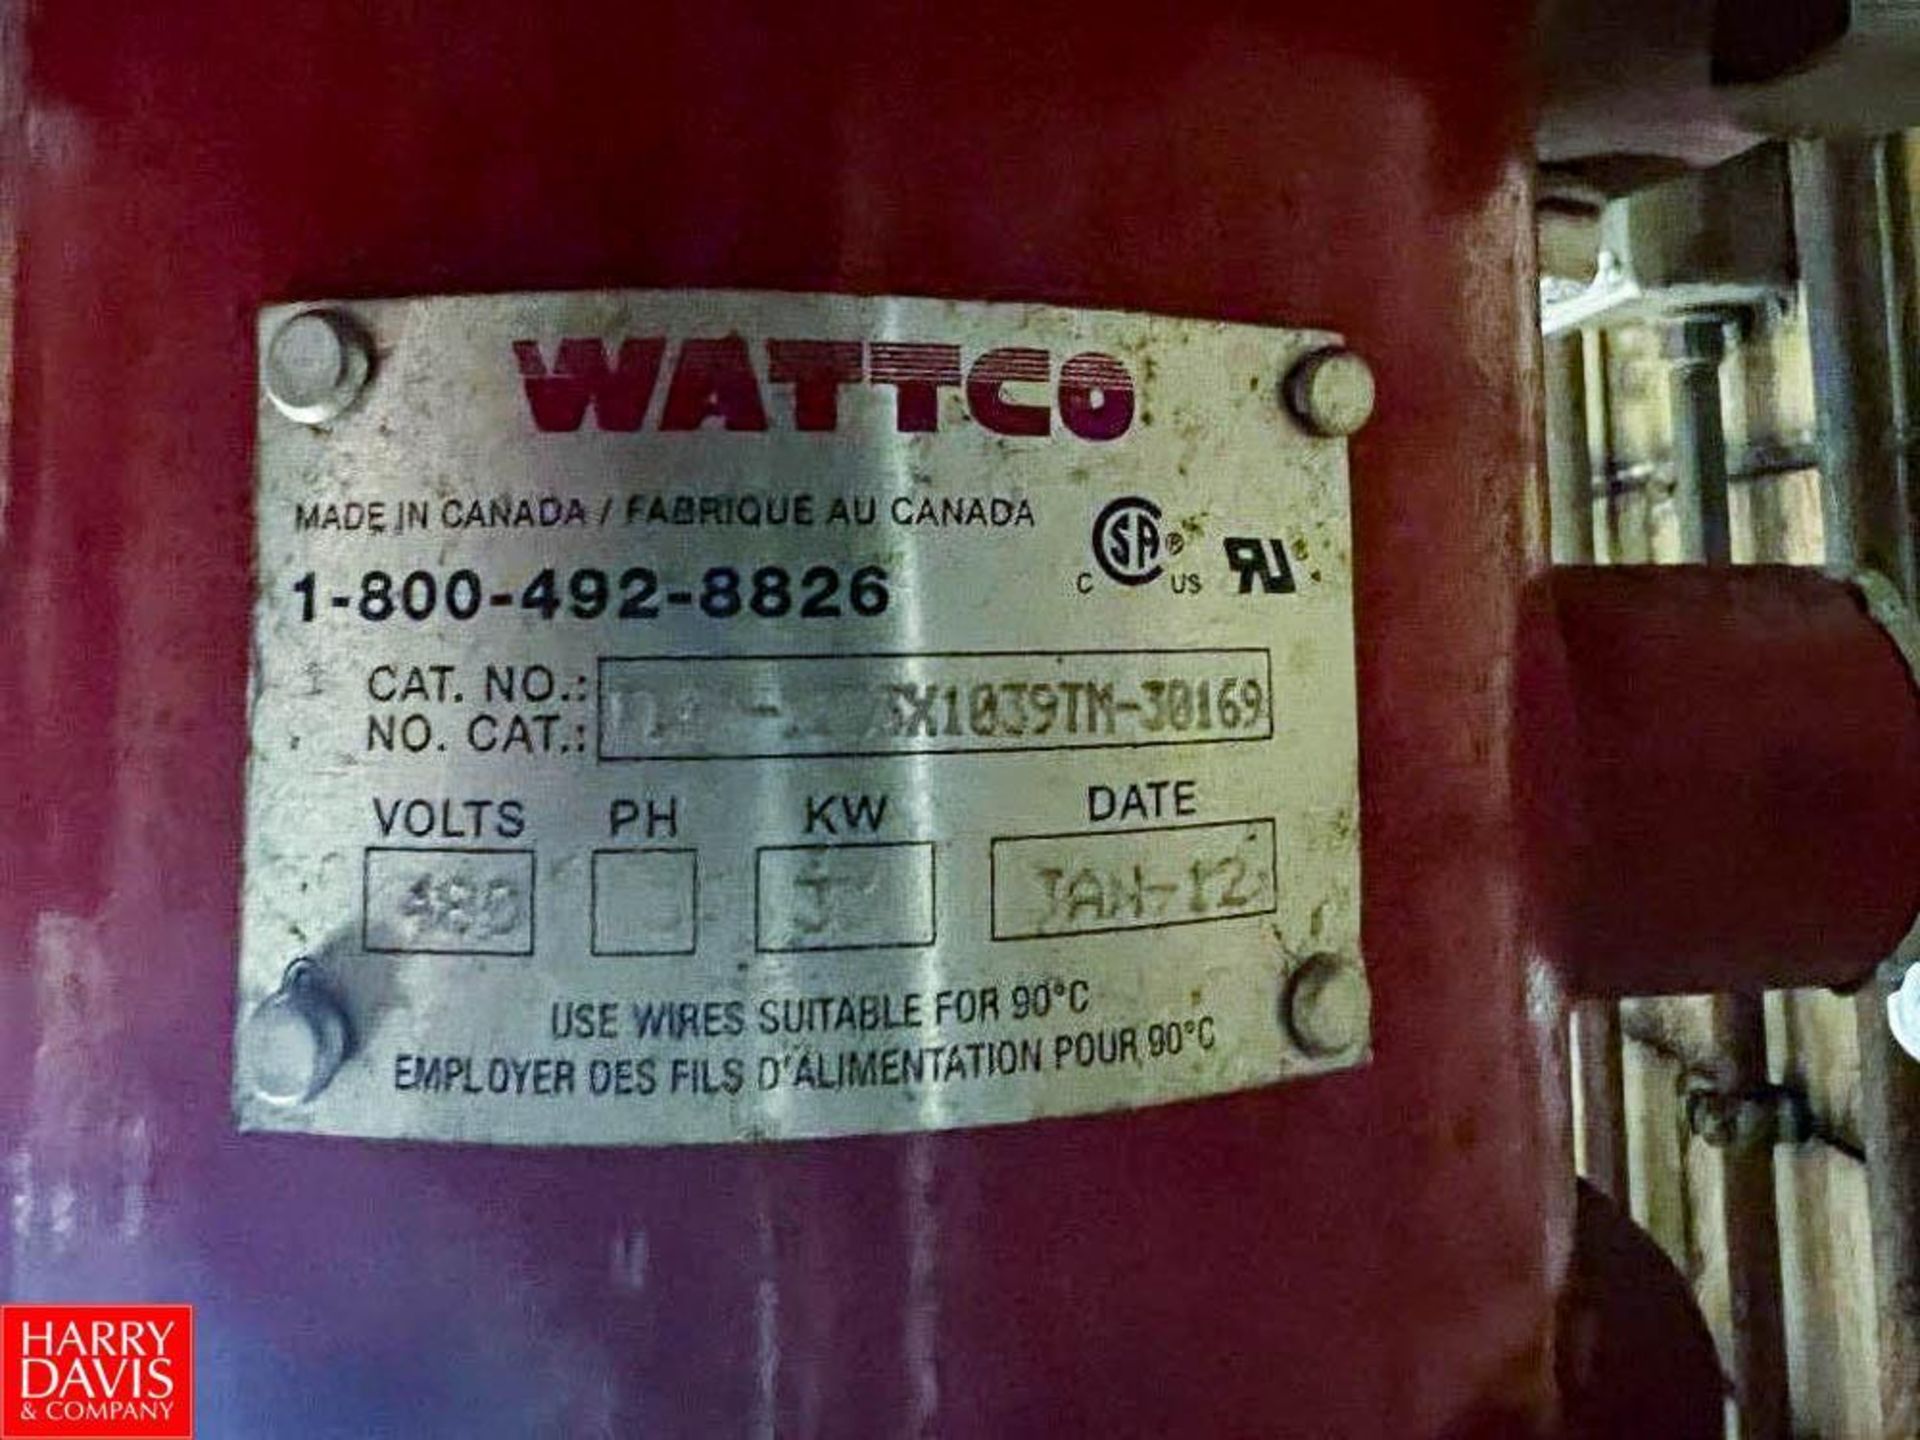 Wattco Industrial Heater, Catalog Number: MPLS-1233X1039TM-30169 - Image 2 of 2